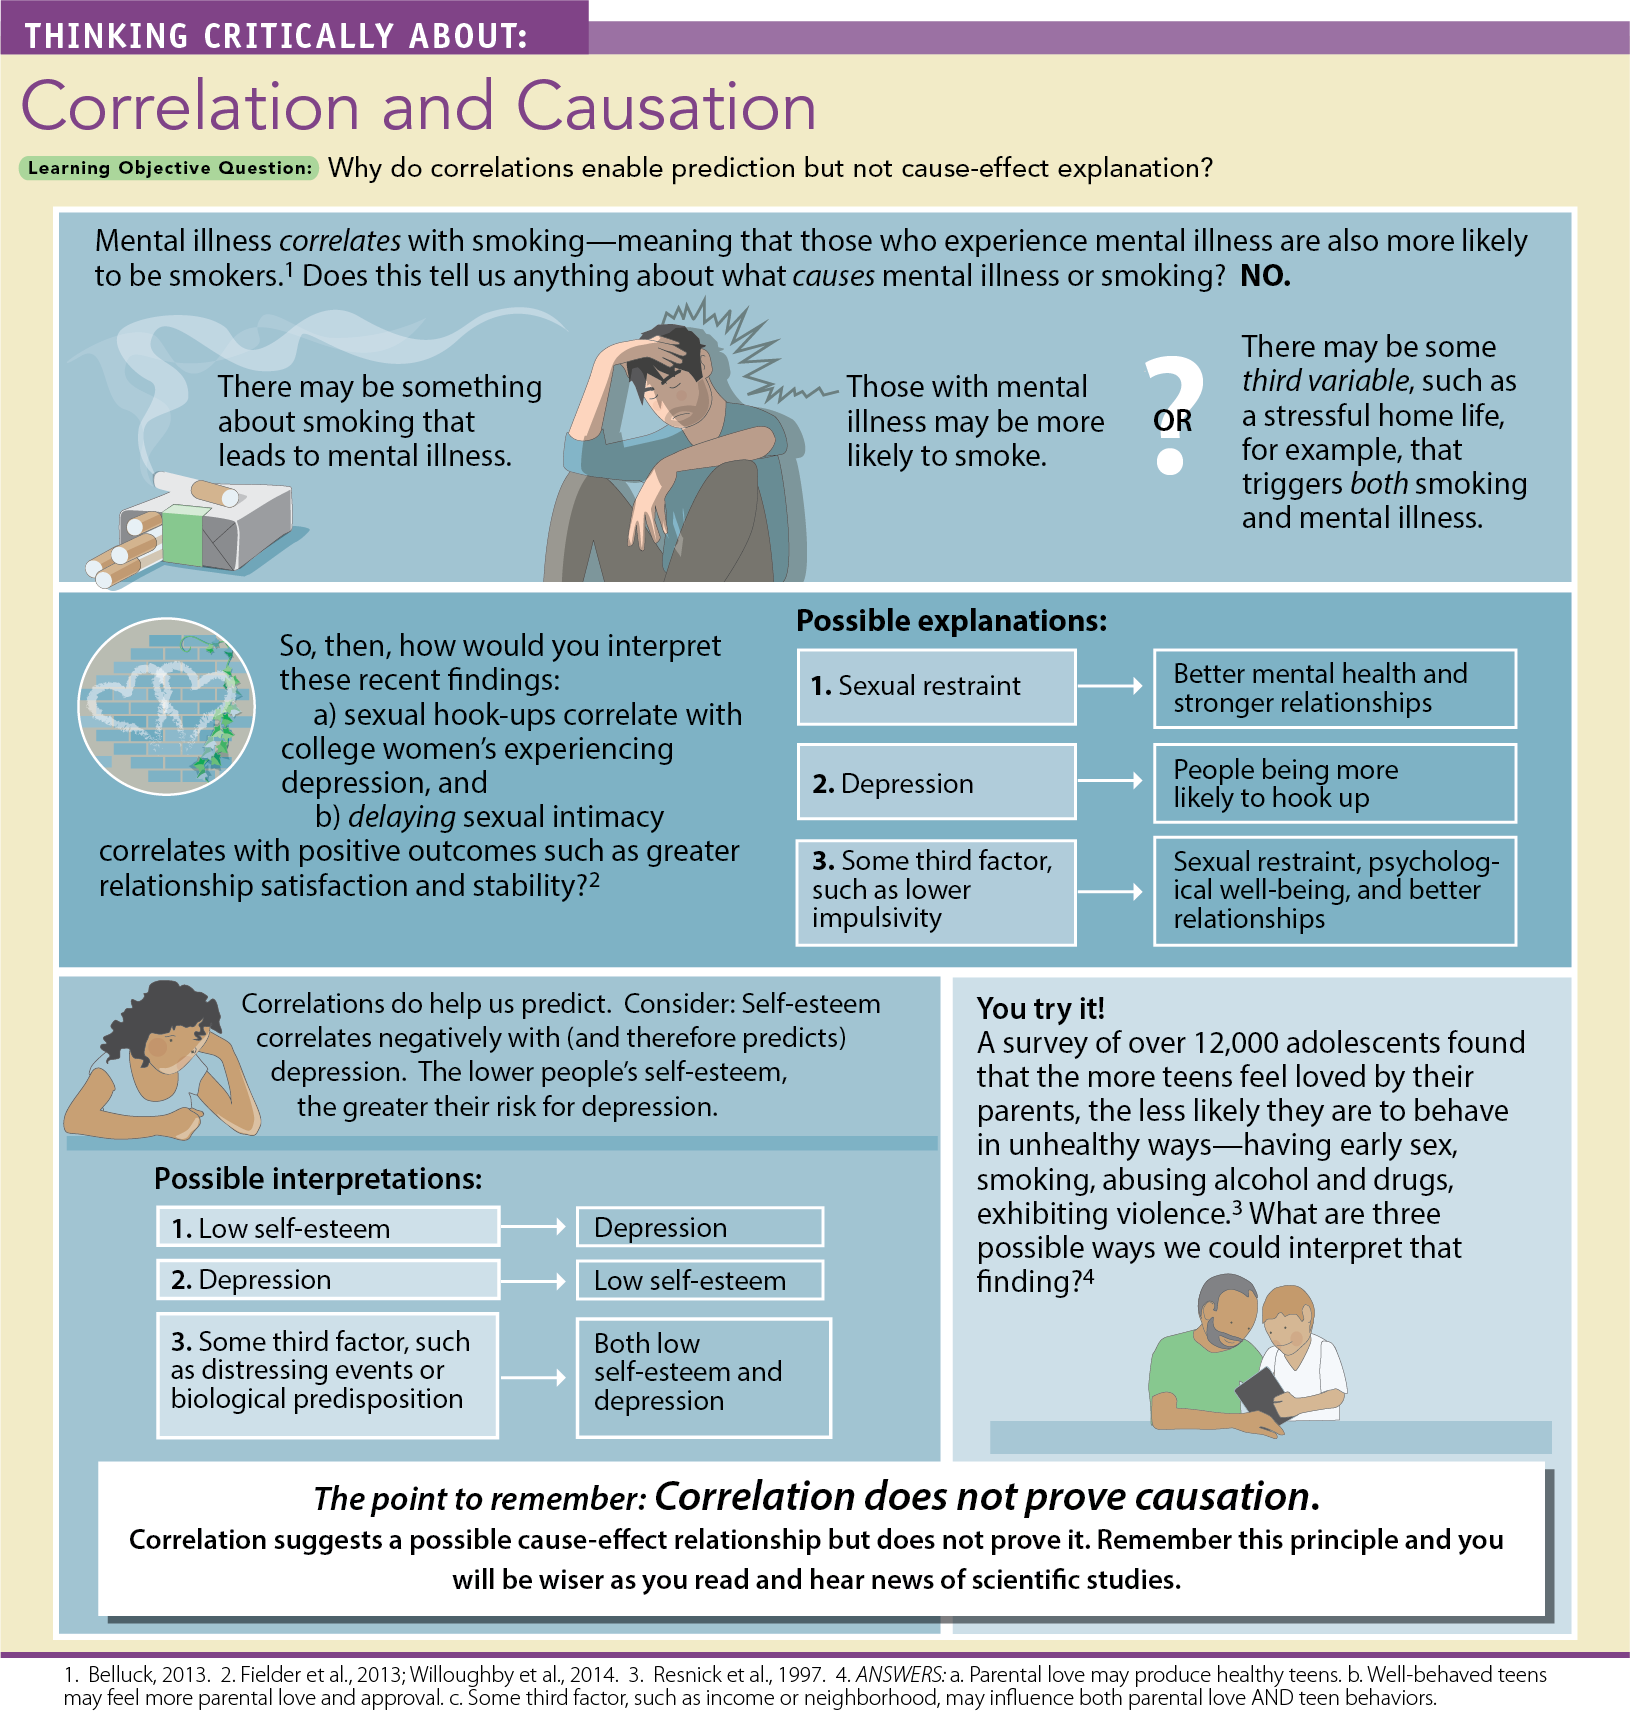 An infographic titled Thinking Critically About: Correlation and Causation is shown. The infographic has four parts. You can read full description from the link below